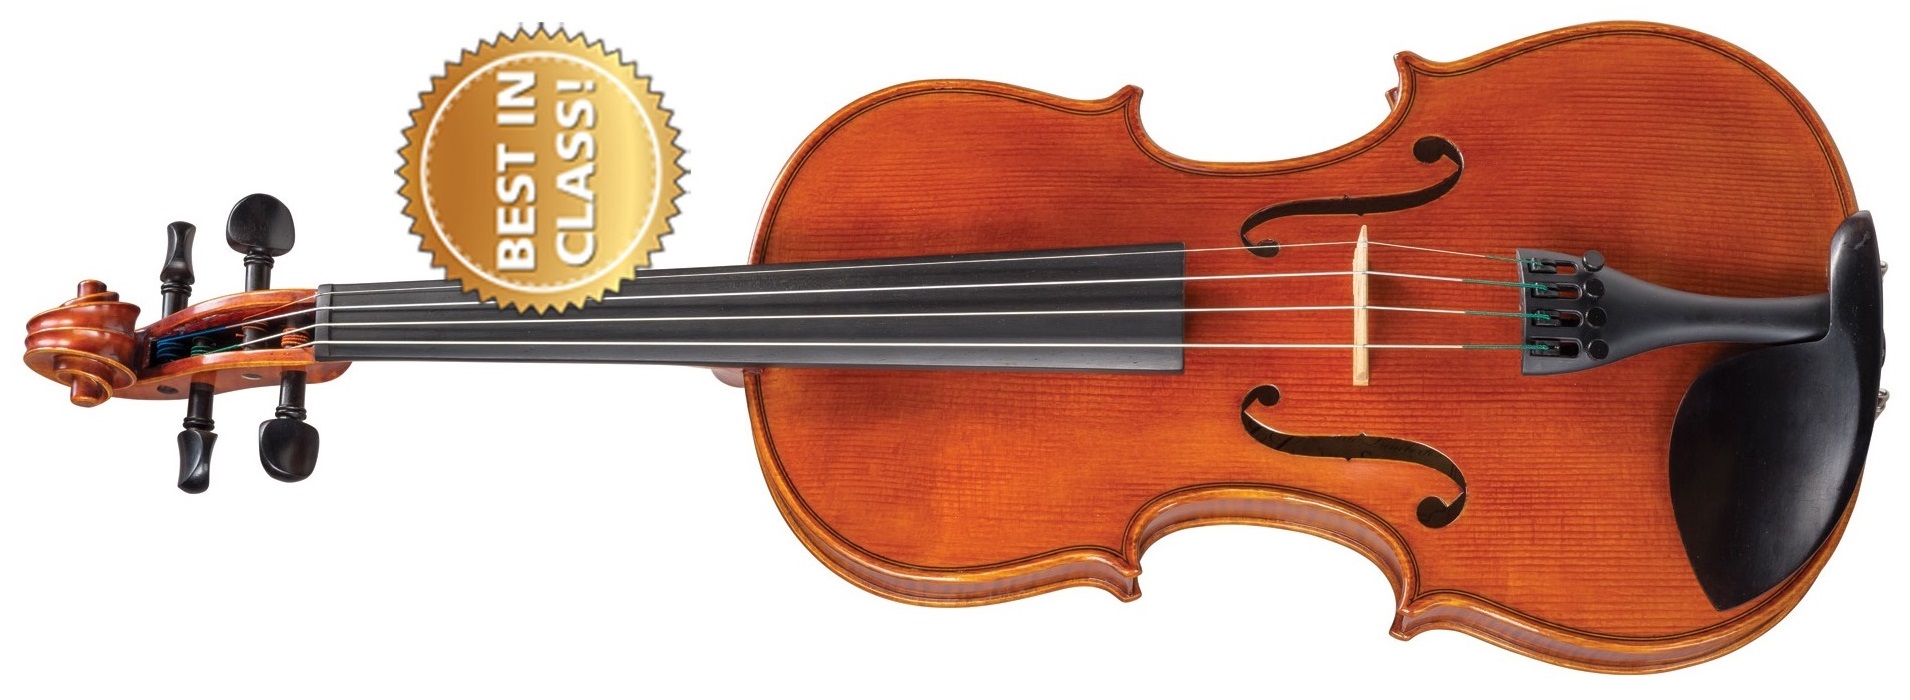 how much money do I have to spend for a kids violin